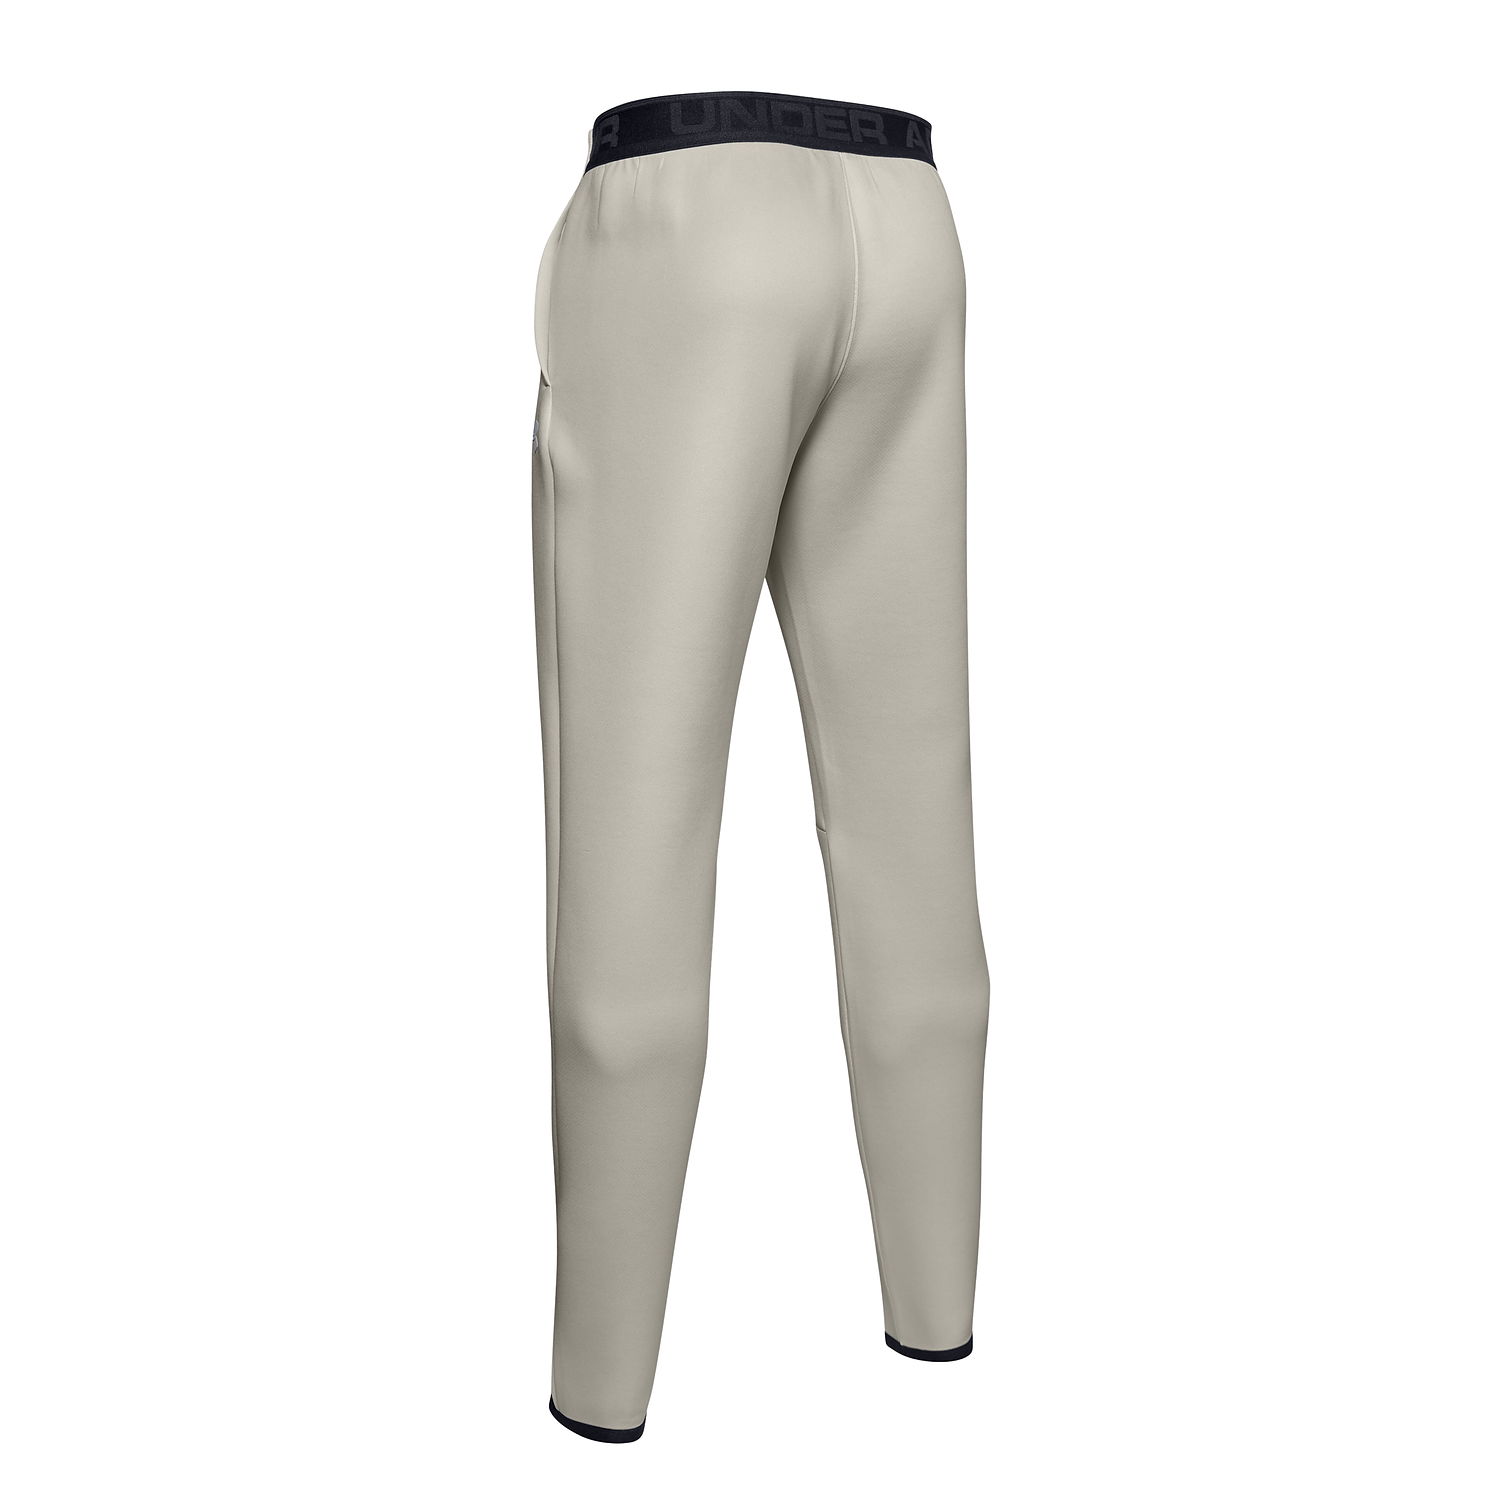 Under Armour 'MOVE' Mens Flat Front Pants (Medium, Summit White) - image 2 of 2